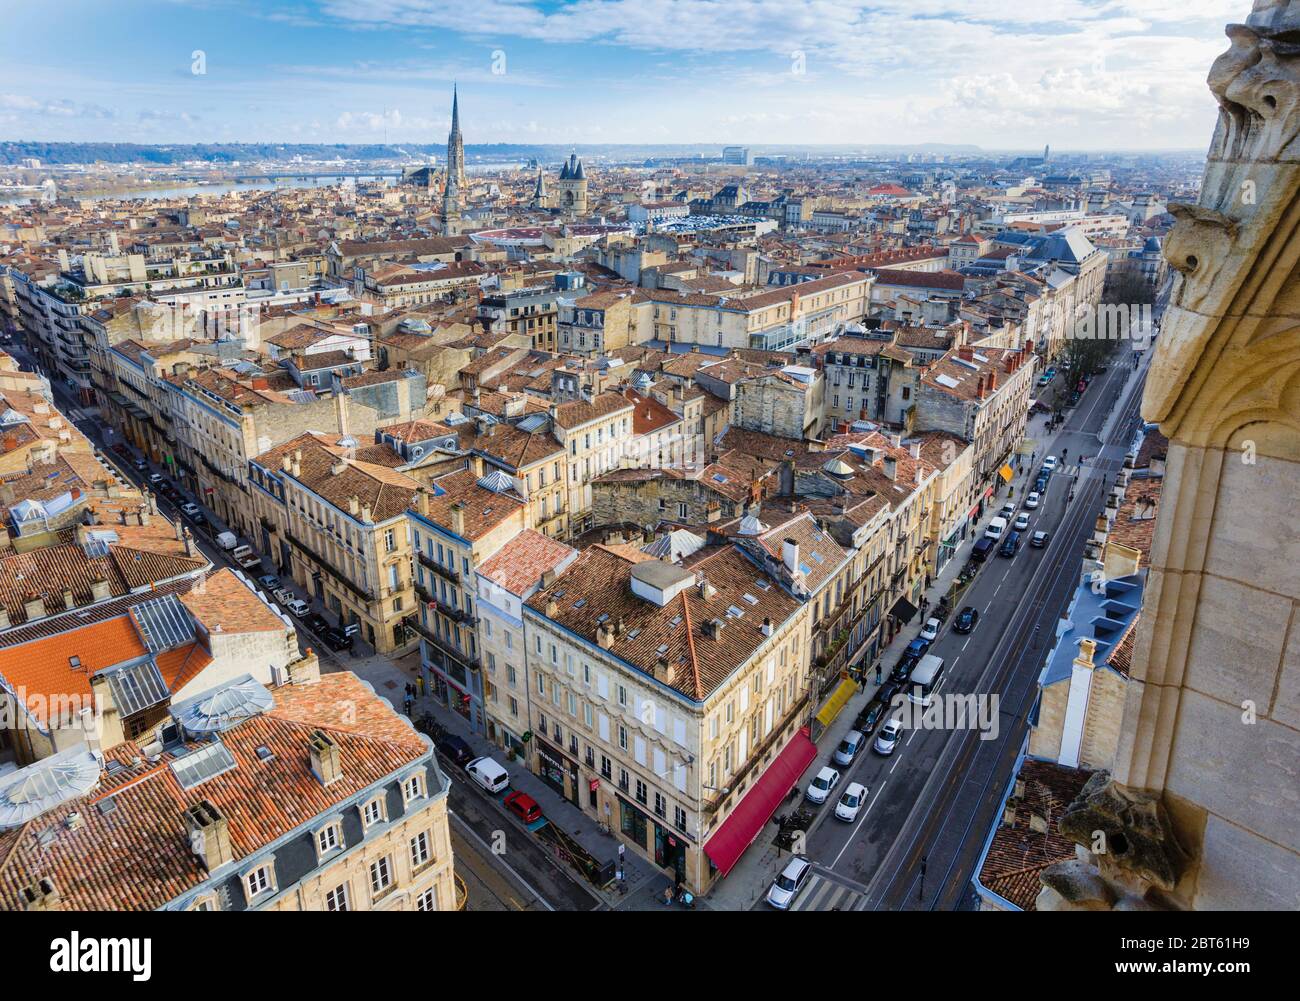 Bordeaux, Gironde Department, Aquitaine, France.  View over Bordeaux from the Tour Pey Berland.  The historic centre of Bordeaux is a UNESCO World Her Stock Photo